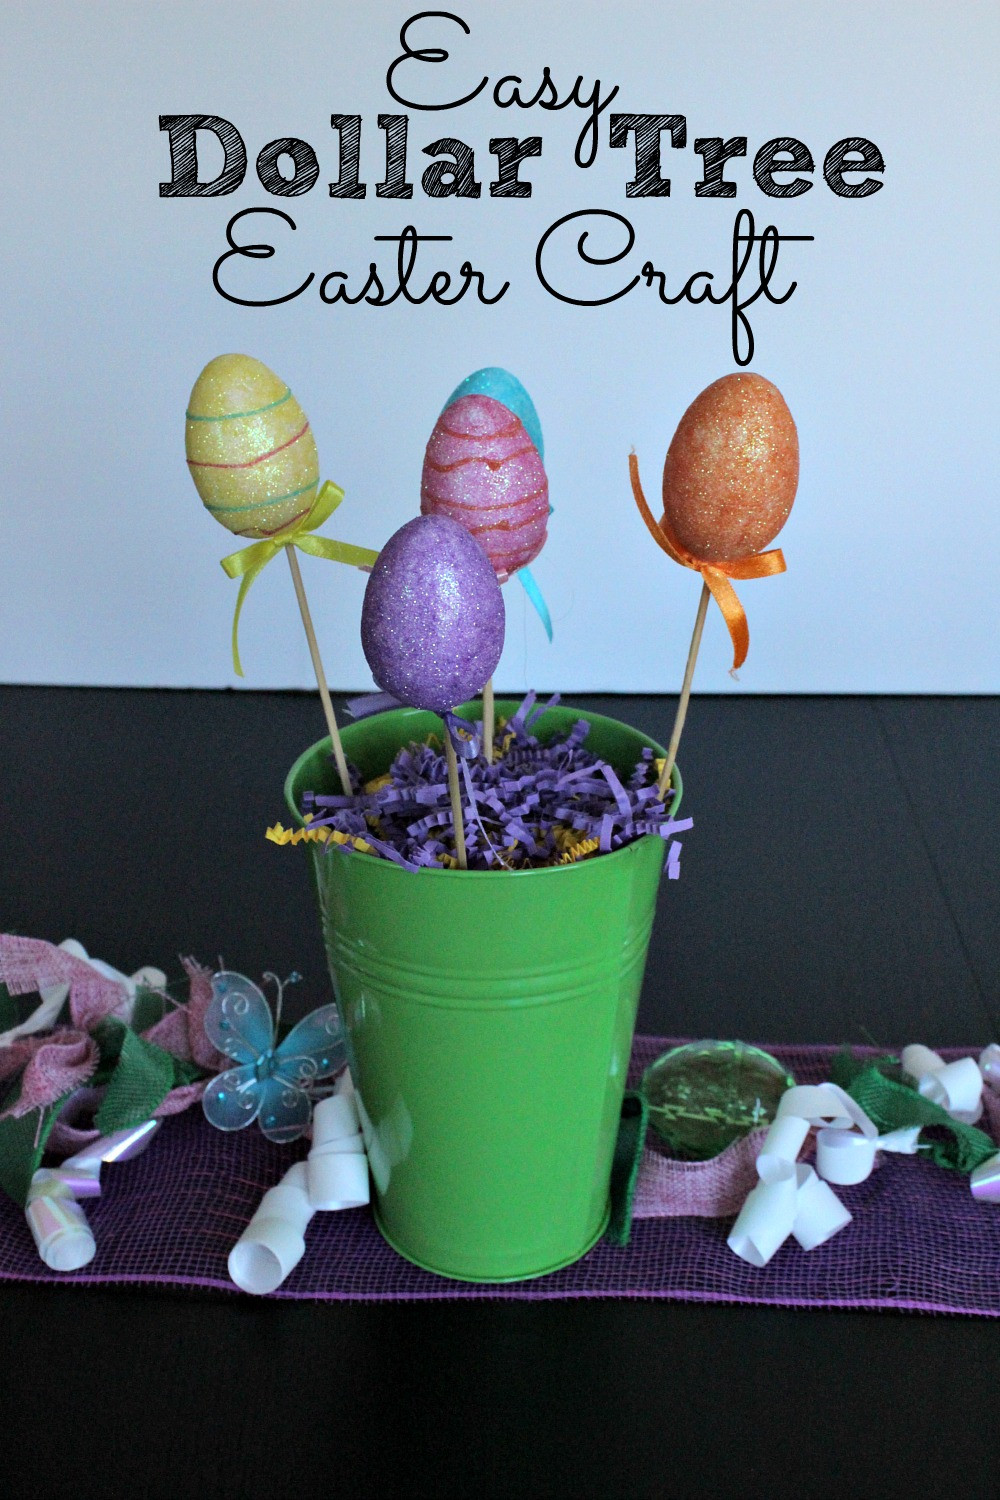 Dollar Tree Easter Crafts
 Easter Crafts Using Items from the Dollar Tree